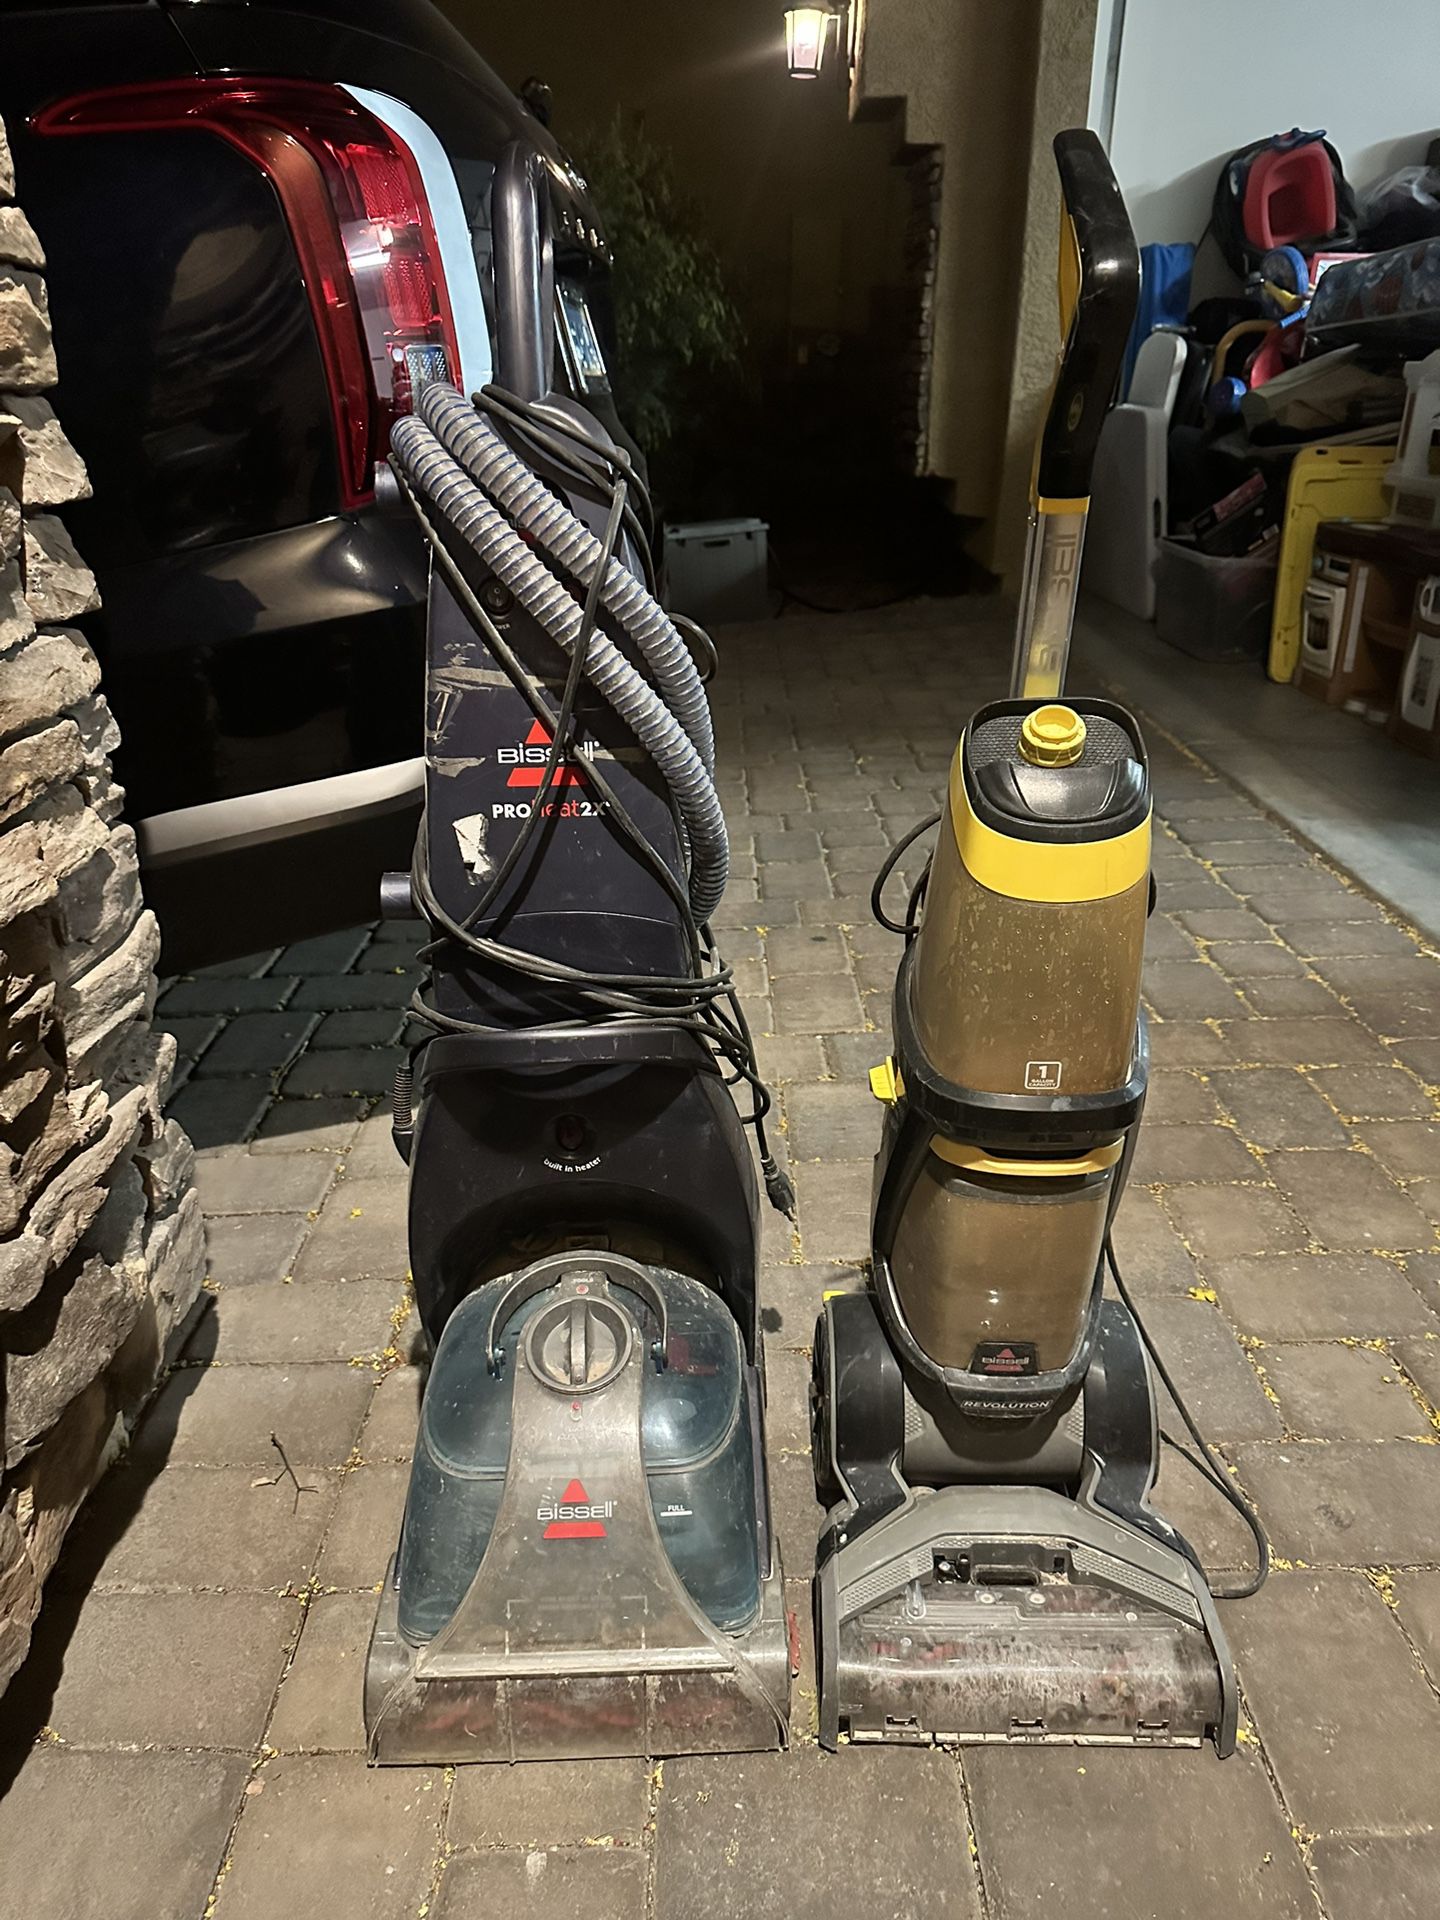 2 BISSELL CARPET CLEANING MACHINES $30 FOR BOTH 